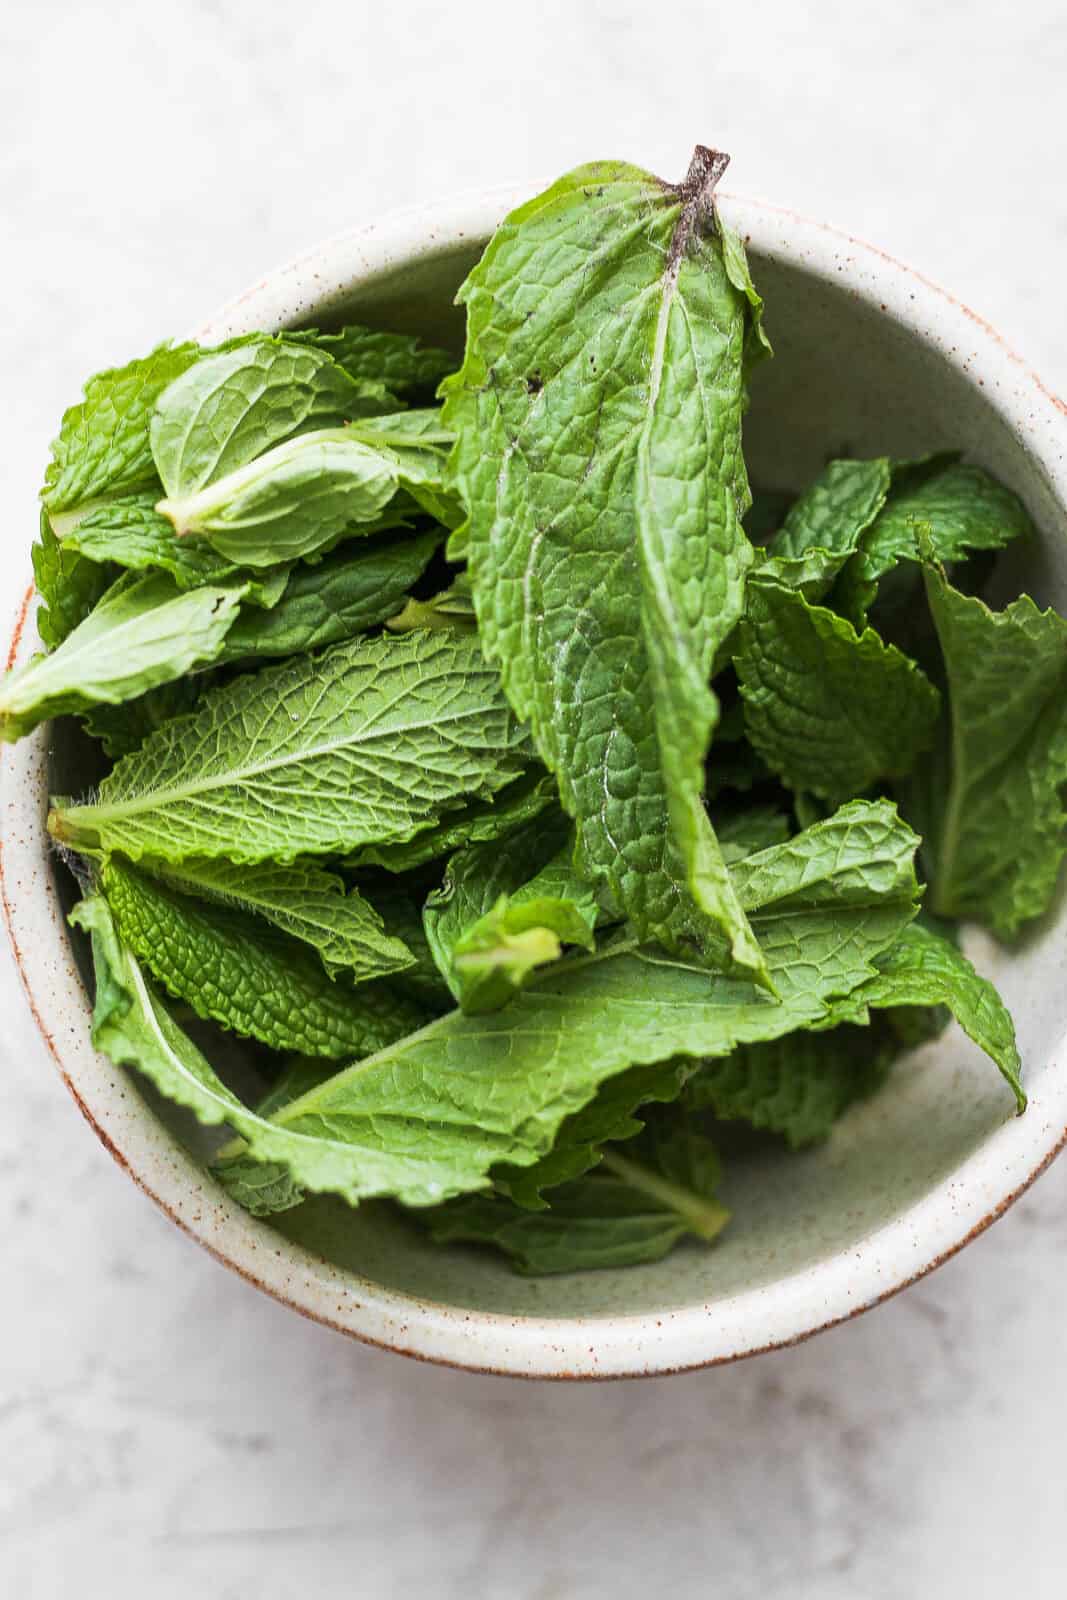 A bowl of mint leaves.